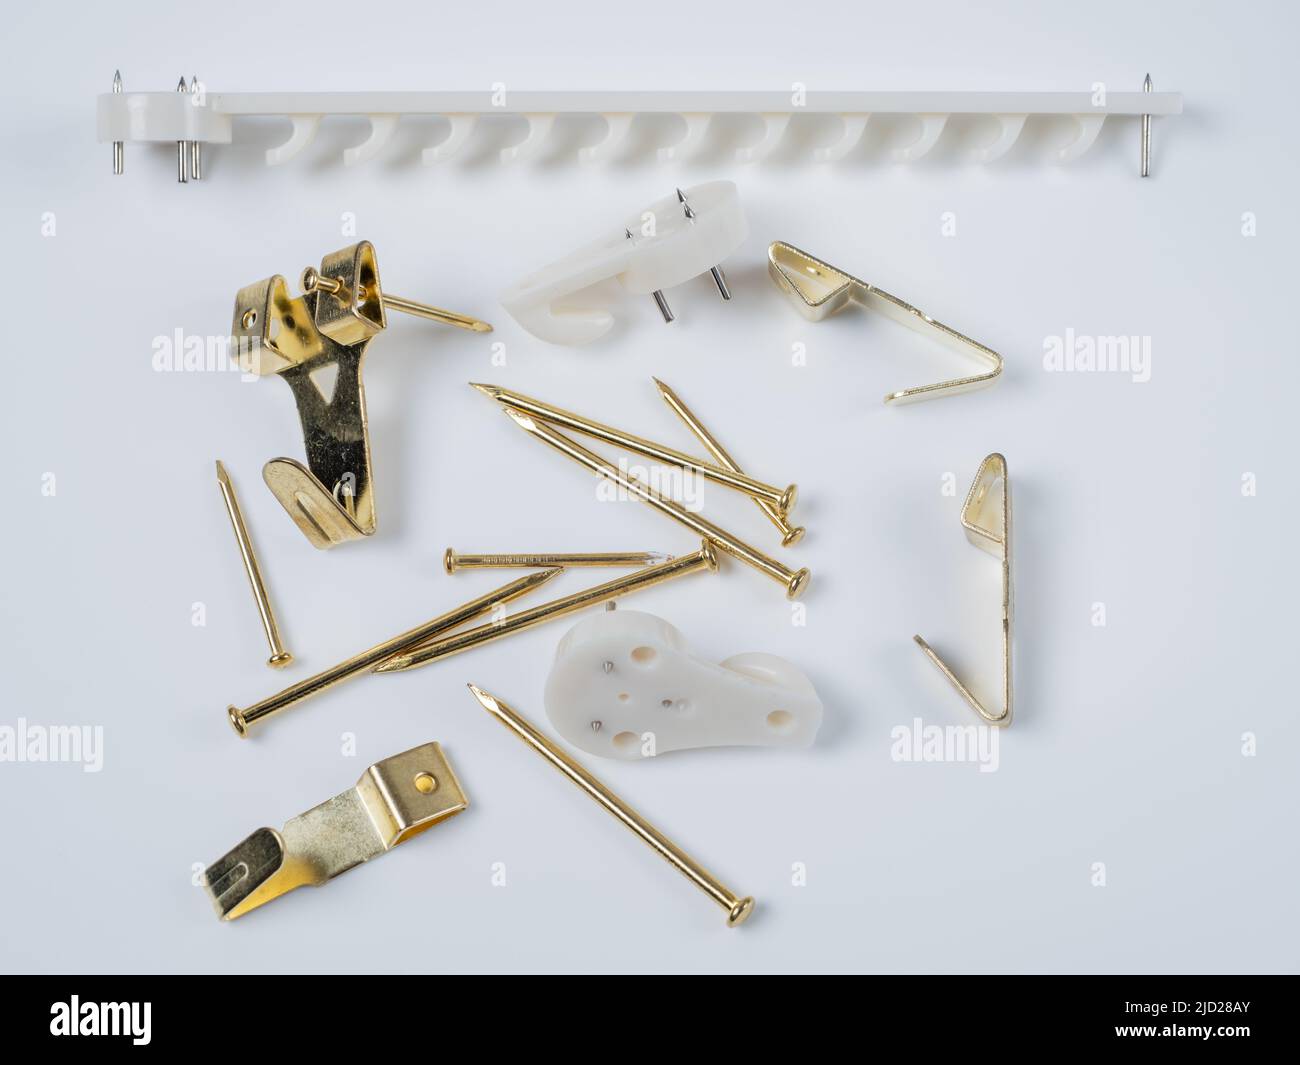 Picture frame wall hanging Accessory Kit of white nylon and gold brass hooks and brad nails Stock Photo